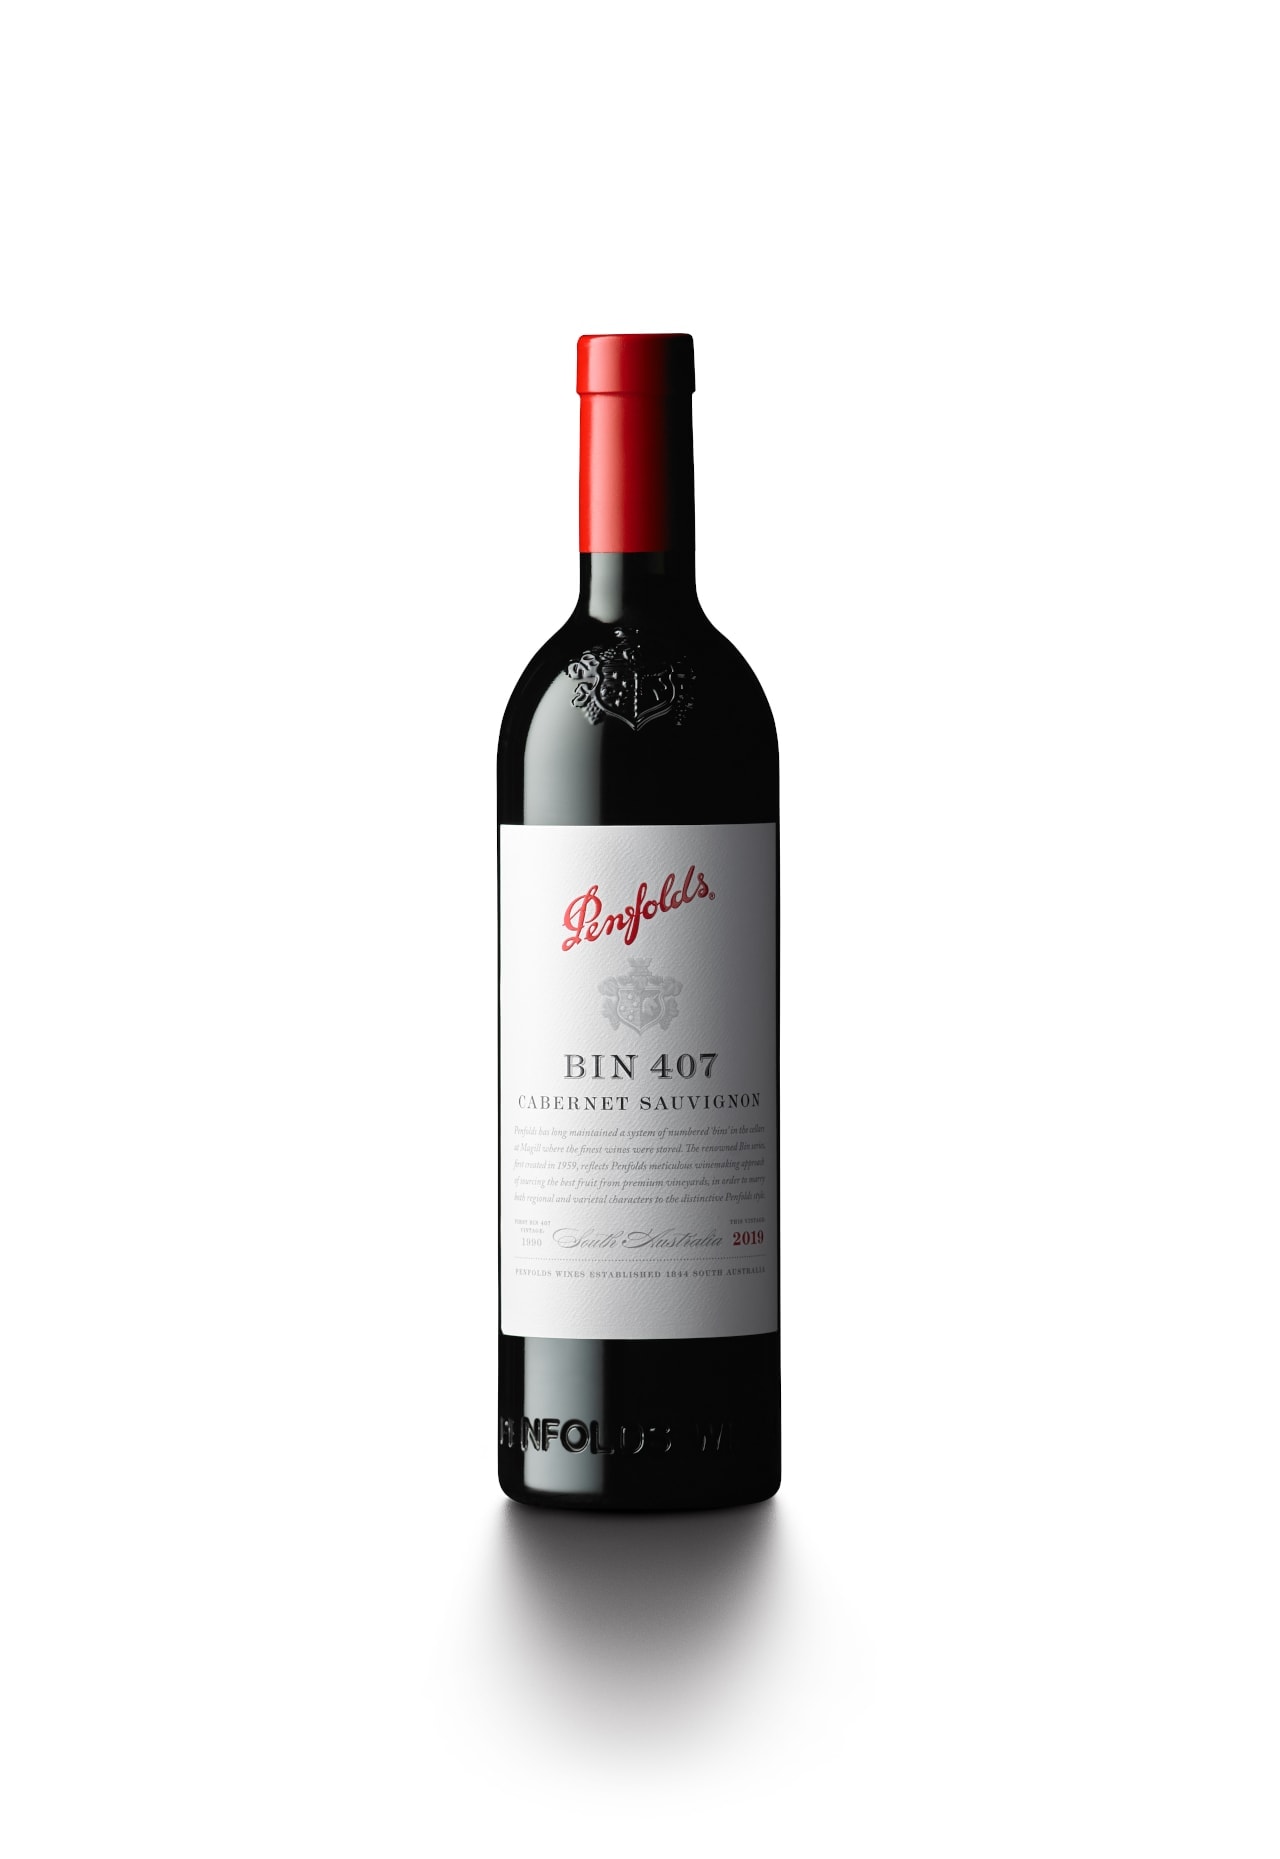 Penfolds Bin 407 Cabernet Sauvignon 2019 Cork 110 22Bin 407 Offers Varietal Definition And Approachability Yet Still With Structure And Depth Of Flavour. Textbook Cabernet Sauvignon.22